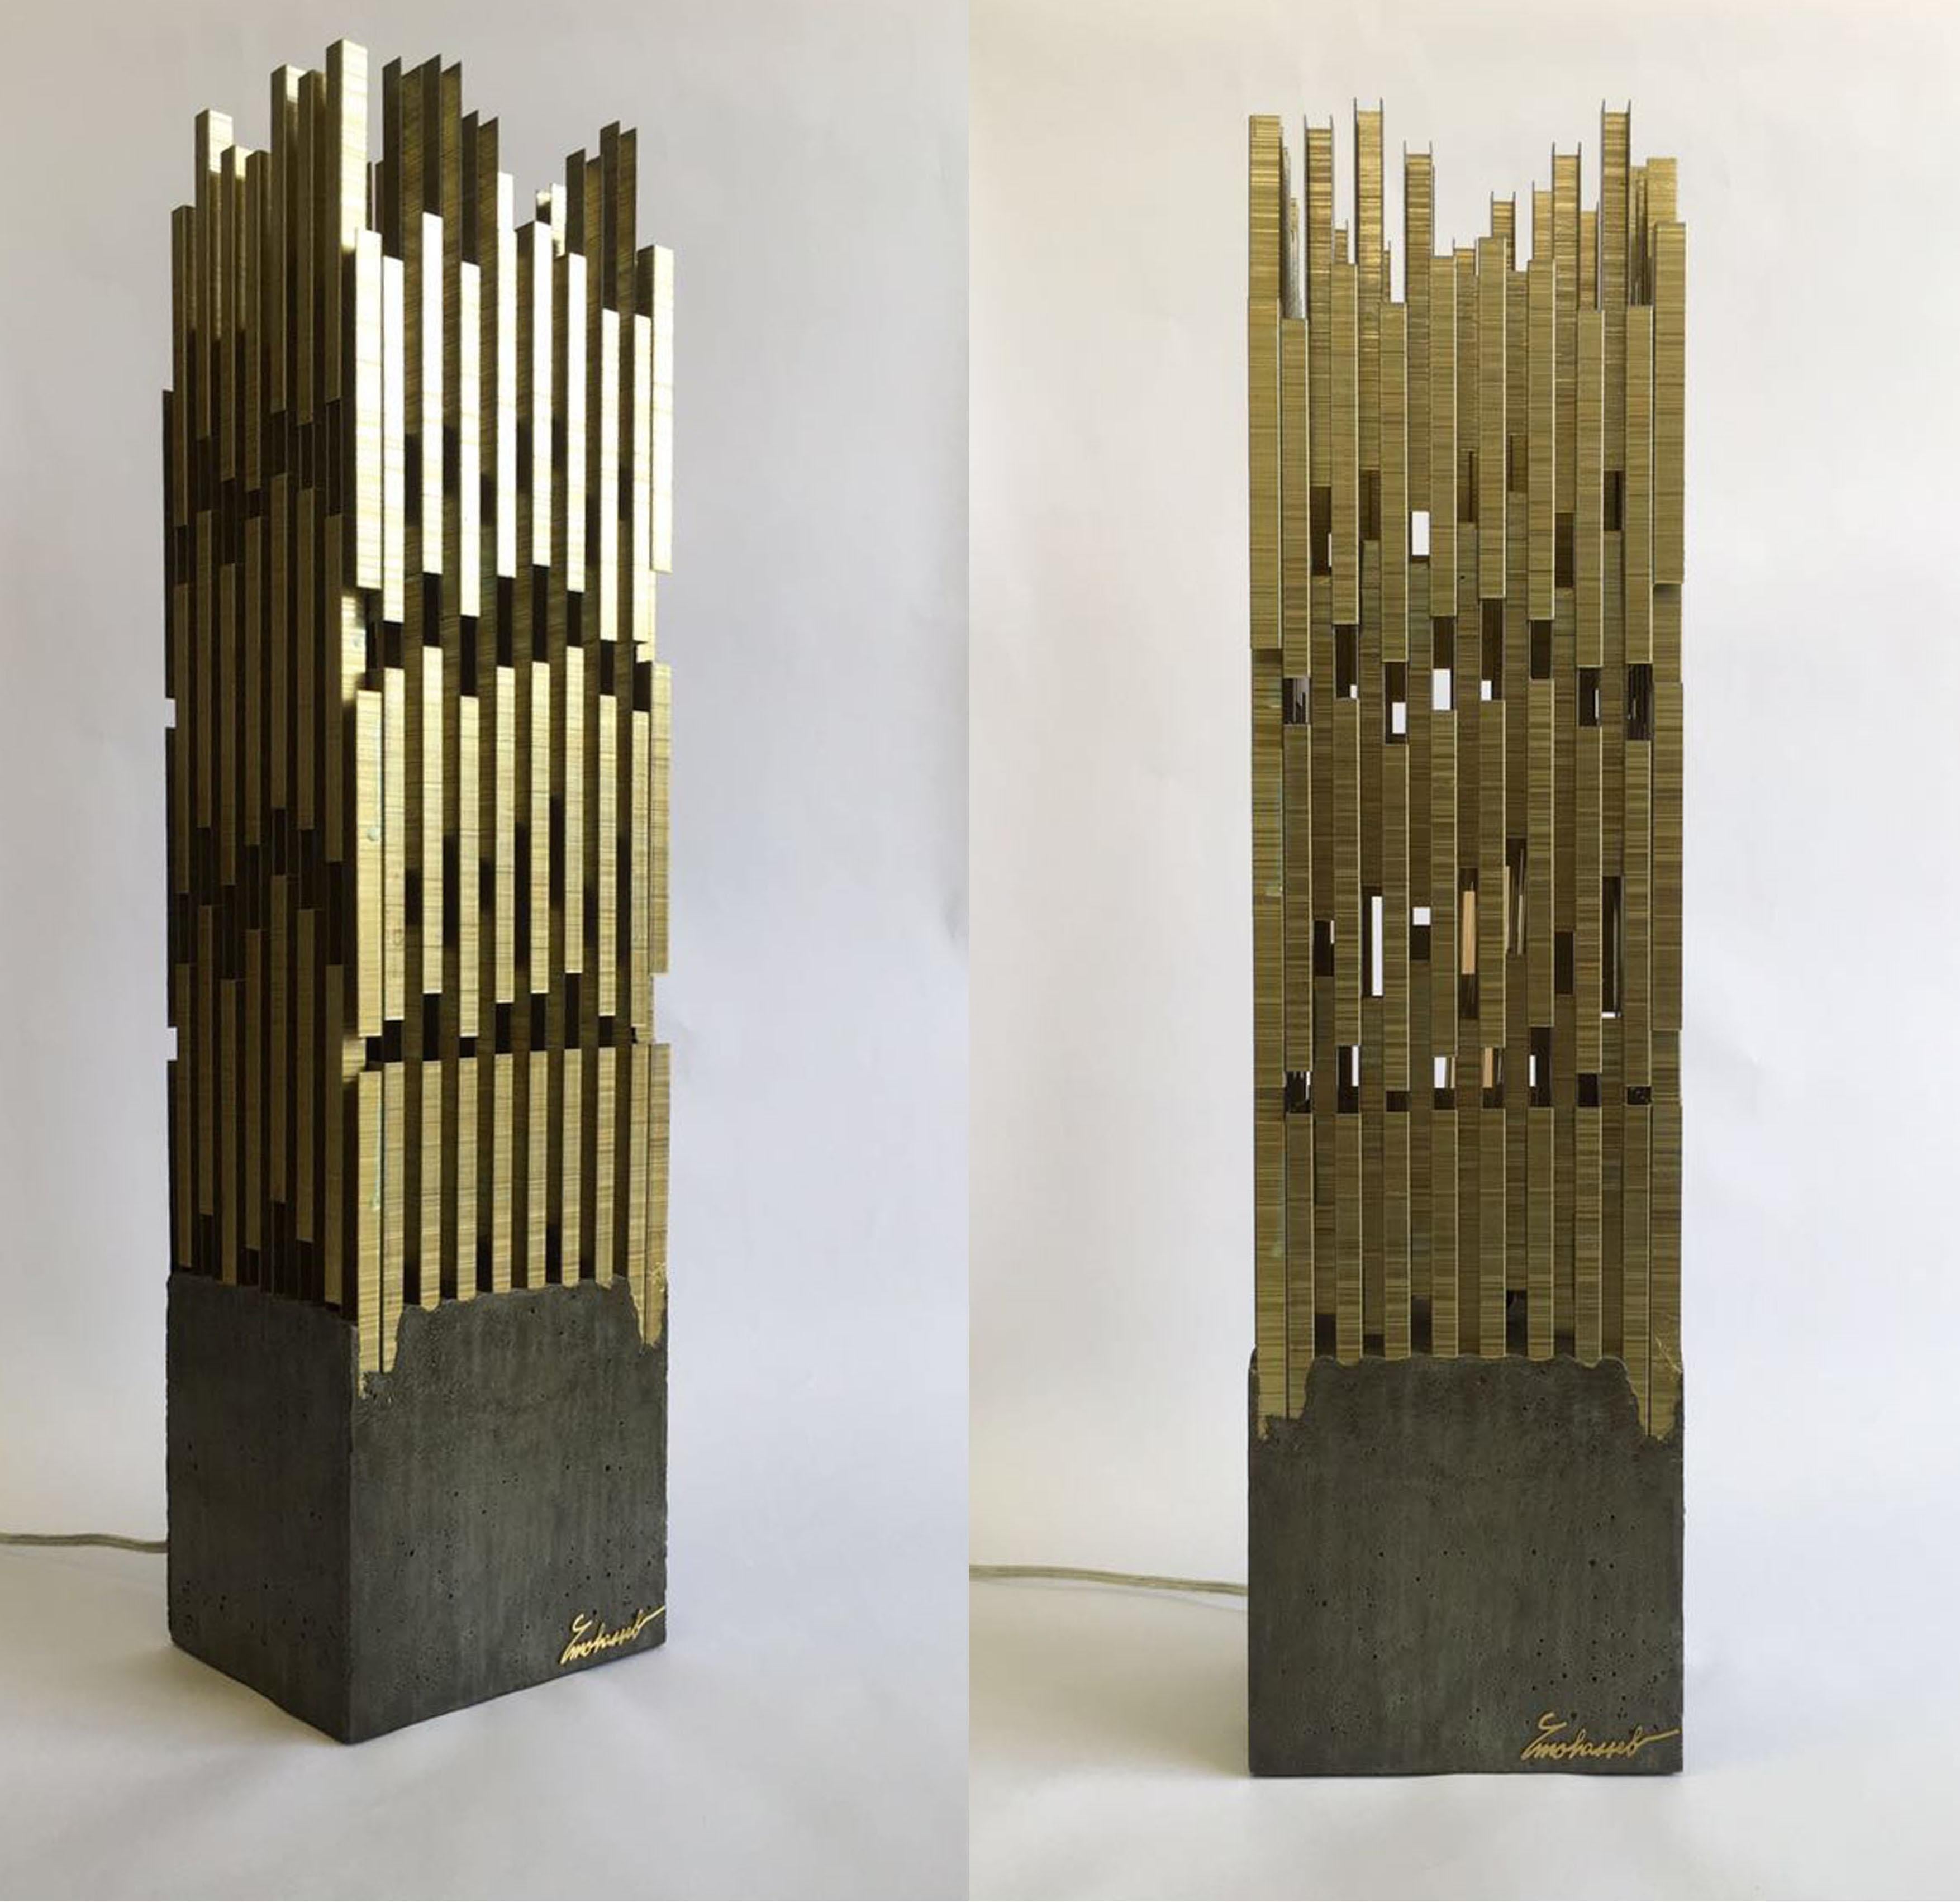 Urban, Georges Mohasseb Design, 2014
Inspired by the city nightscape, Urban is a table lamp, built from a combination of industrial materials as a tribute to what defines the cities we live in. The base is a brute concrete square cast topped with